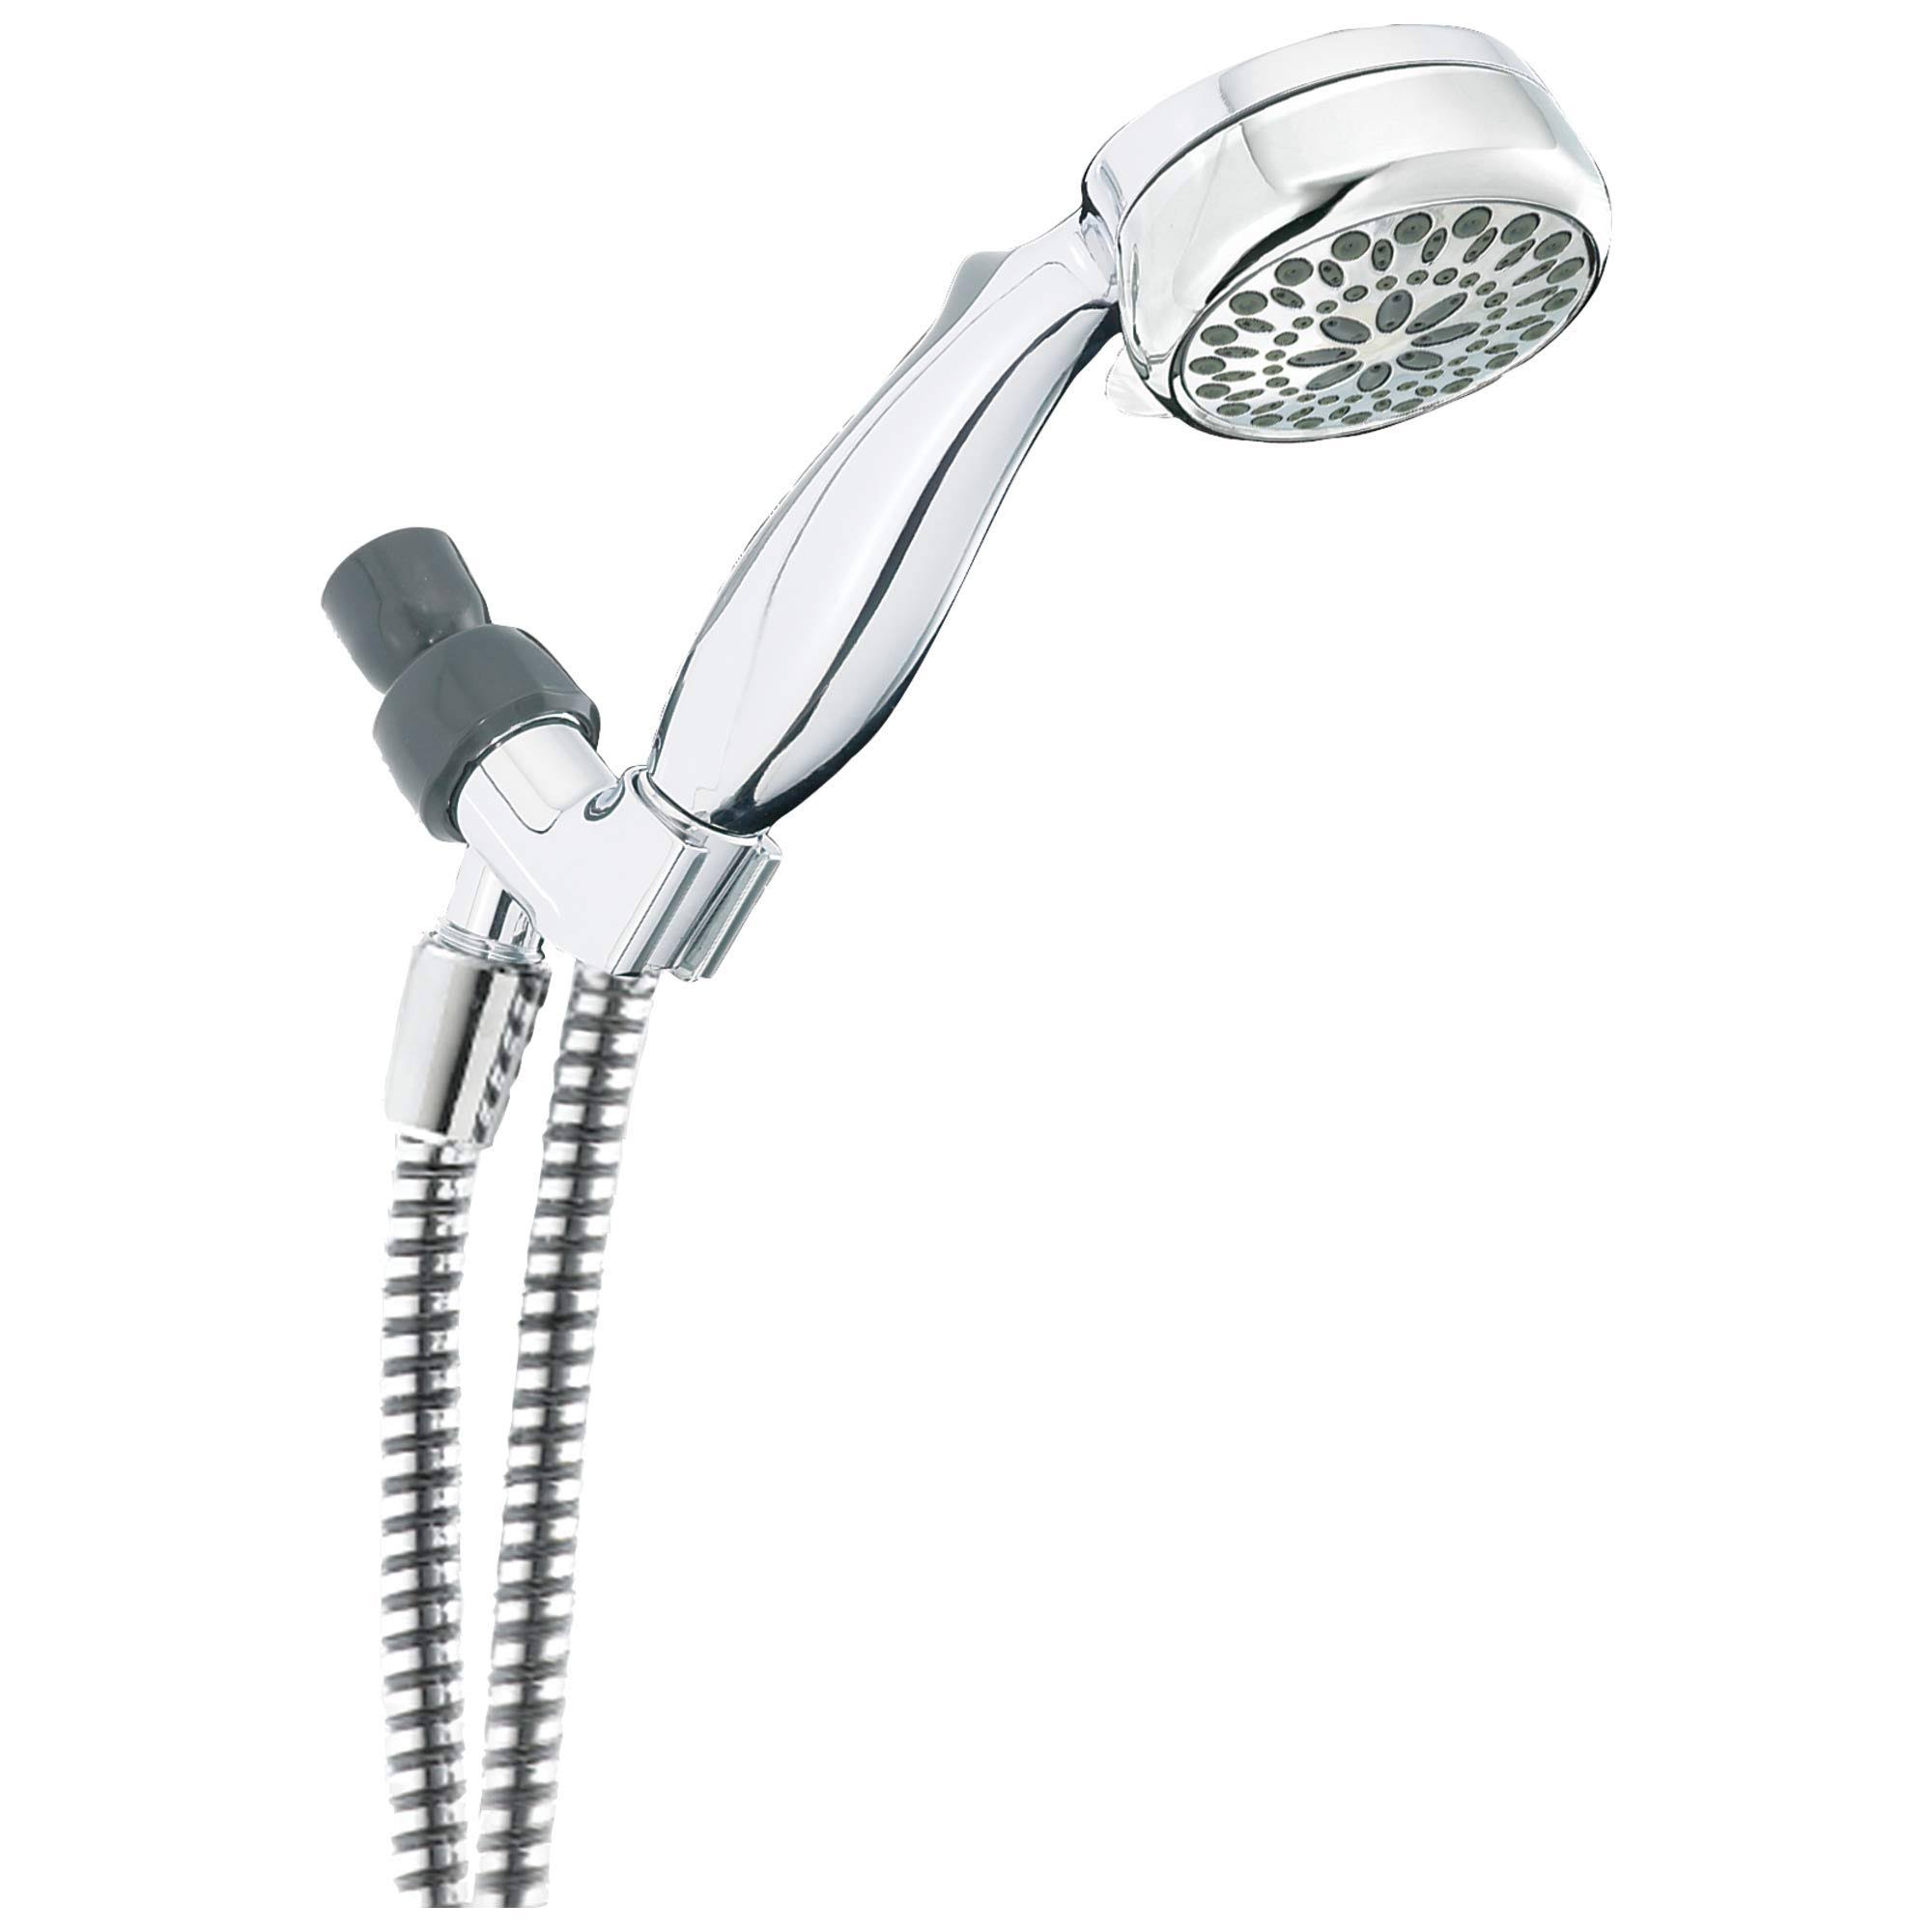 Delta Faucet Universal Showering Components Hand Shower - Chrome, 7 setting